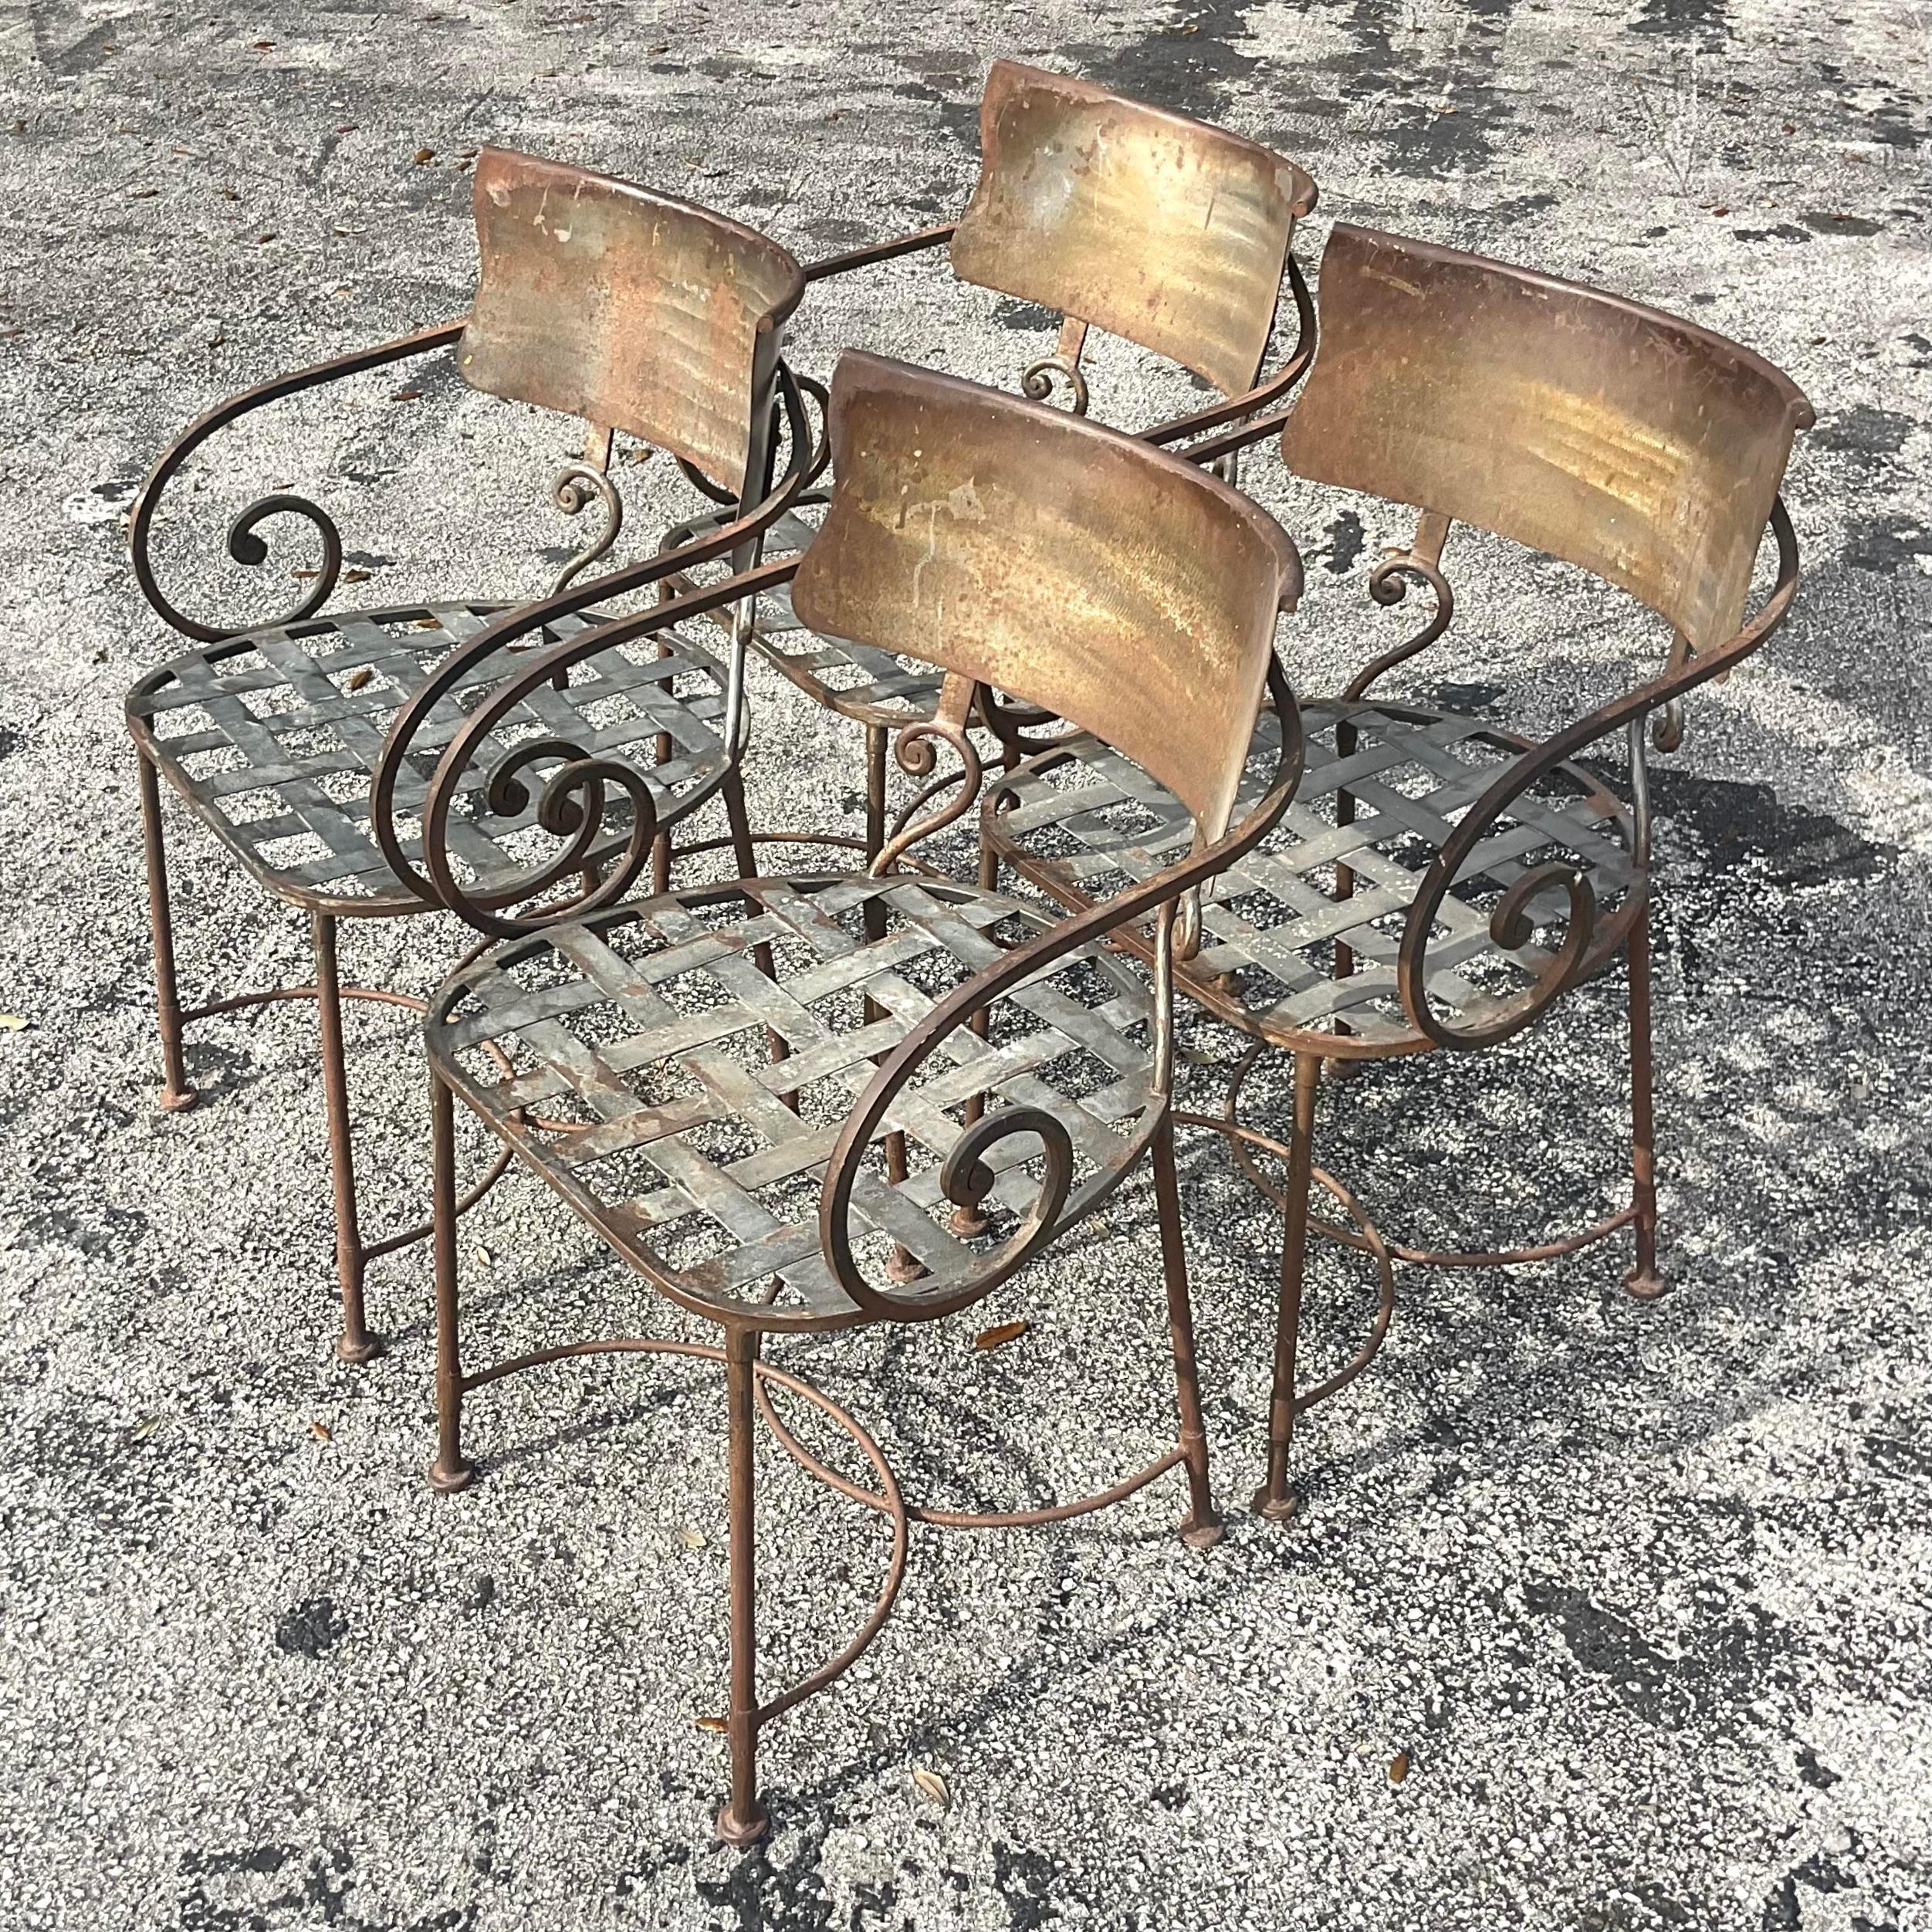 A genius set of 4 vintage wrought iron chairs. Beautiful scroll arm with wide panel backs. Dramatic and comfortable. Currently they have the patina of areas of rust. I think they look fantastic, but would be easy to powder coat with a bright clean